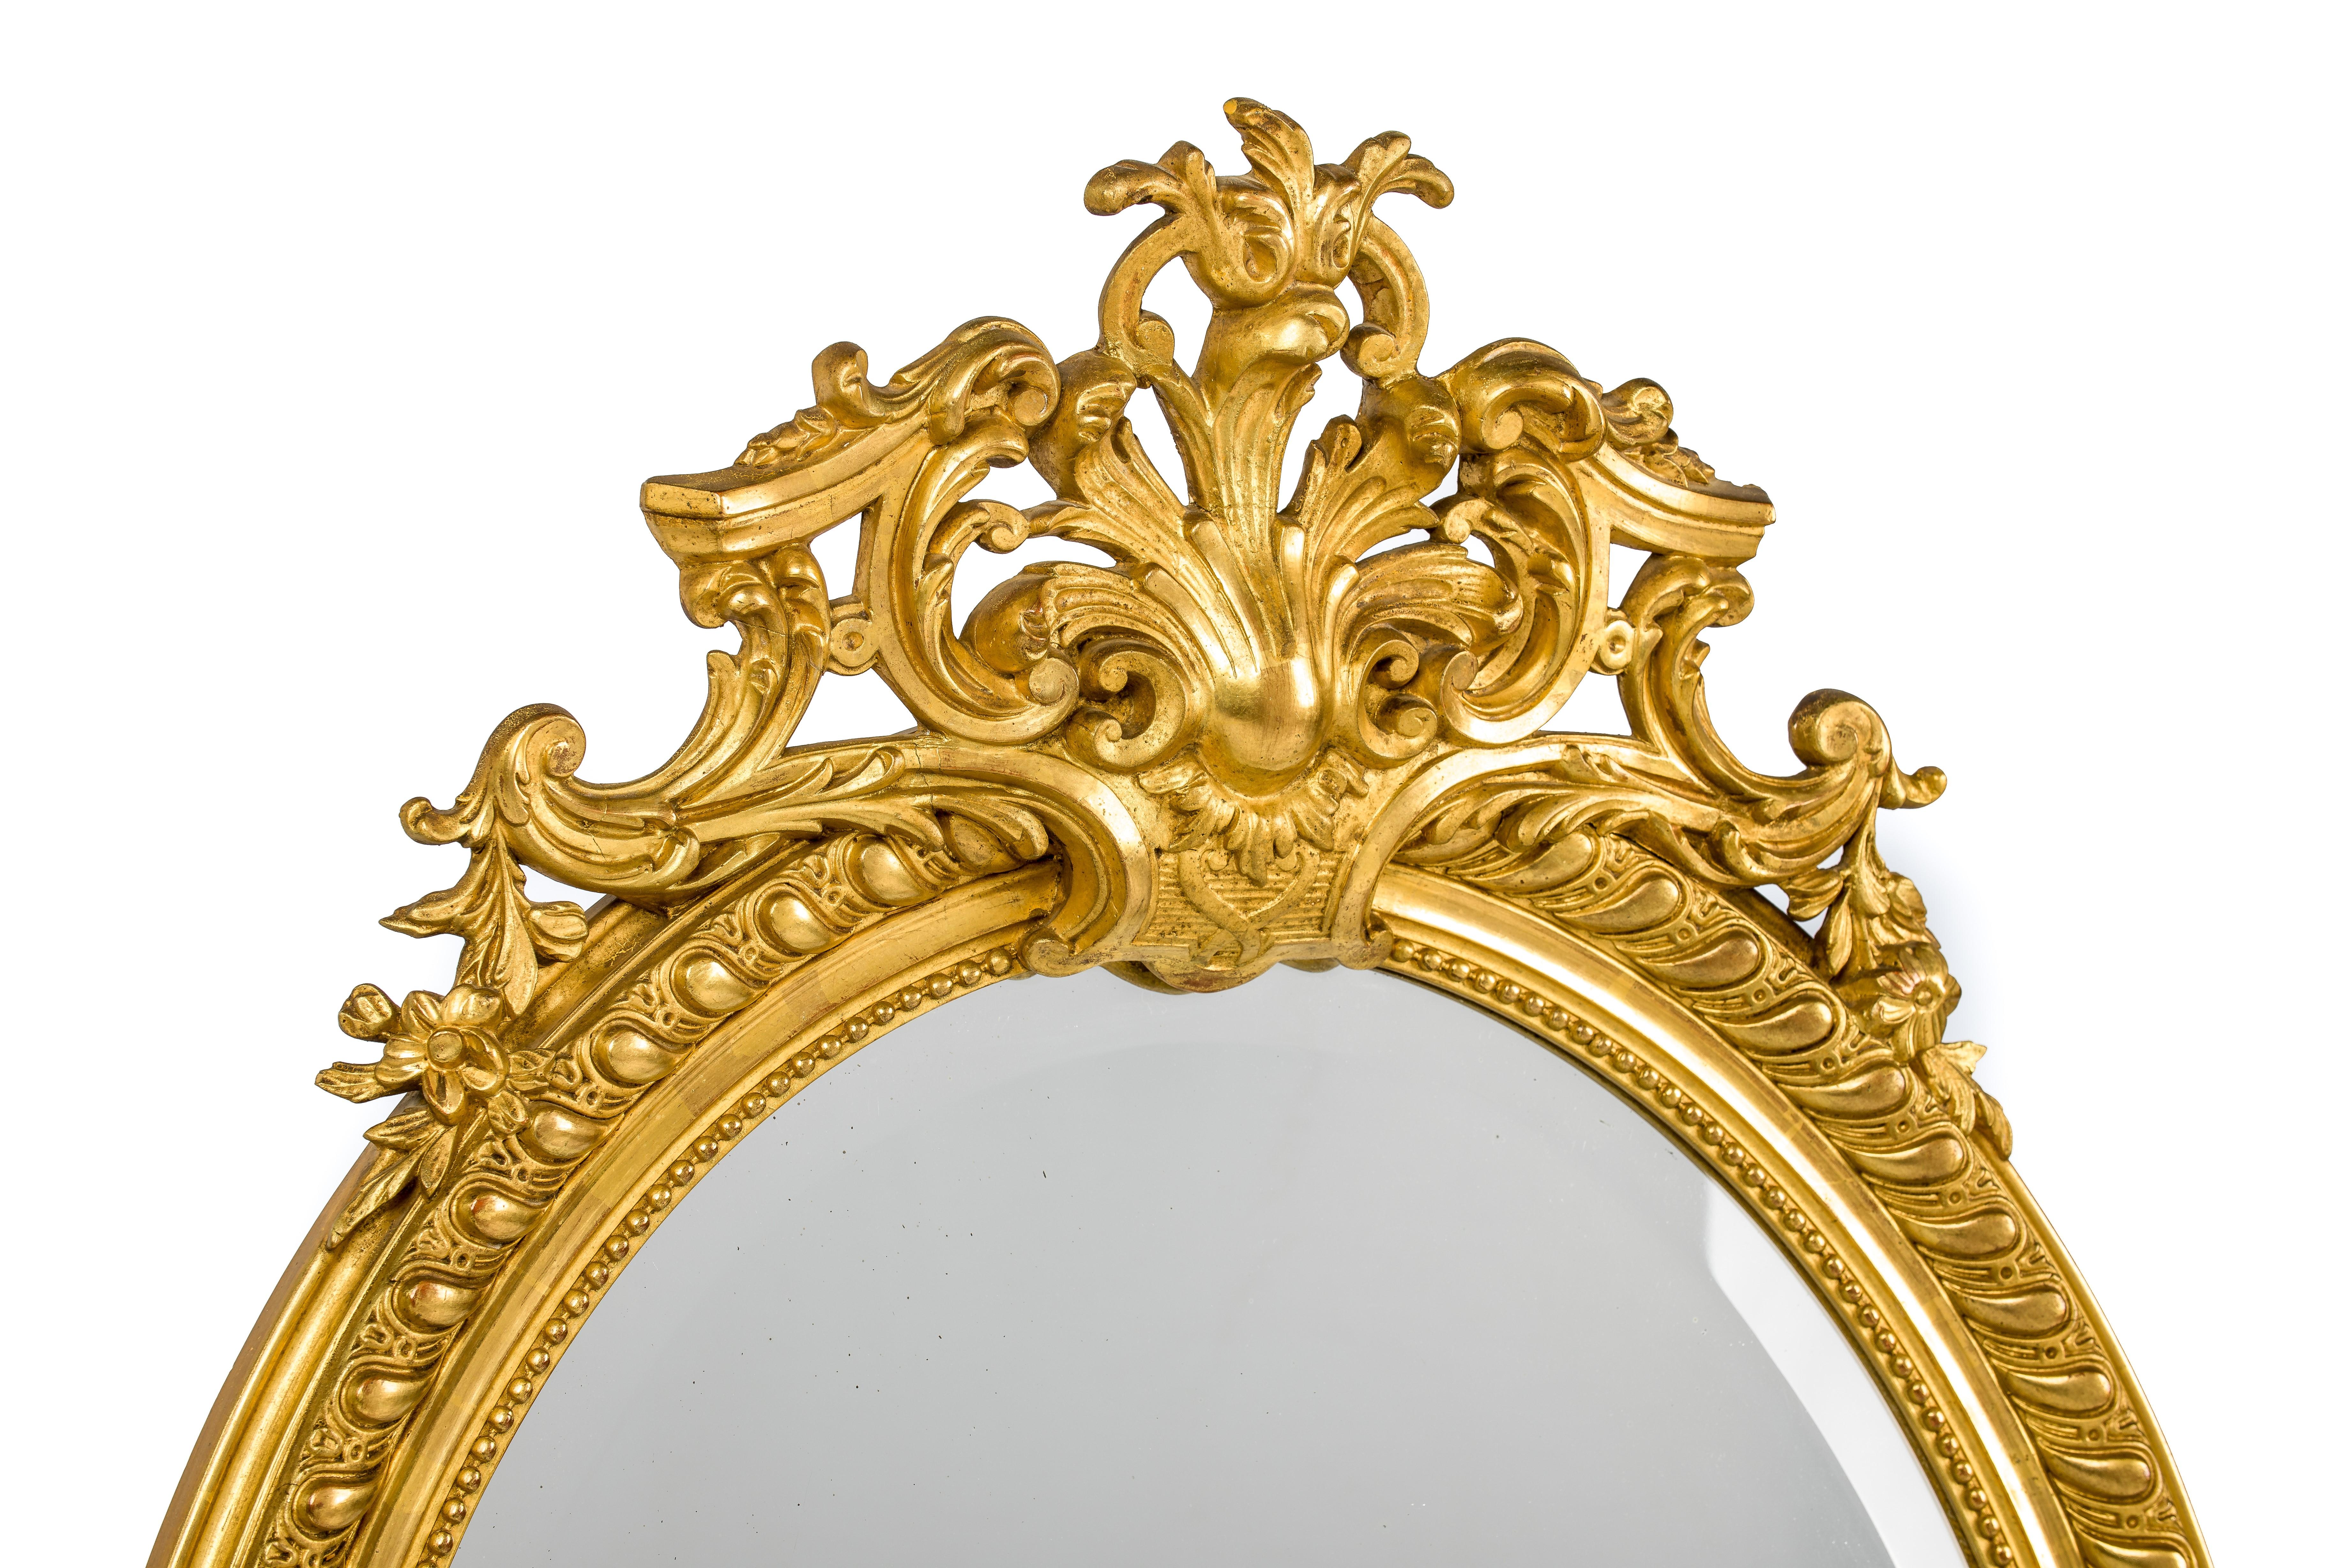 This beautiful antique gold leaf gilt oval mirror was made in southern France in the late 19th century. The top ornament is centered upon an acanthus pediment flanked by C-scrolls, acanthus, and floral elements. The lower ornament has the same